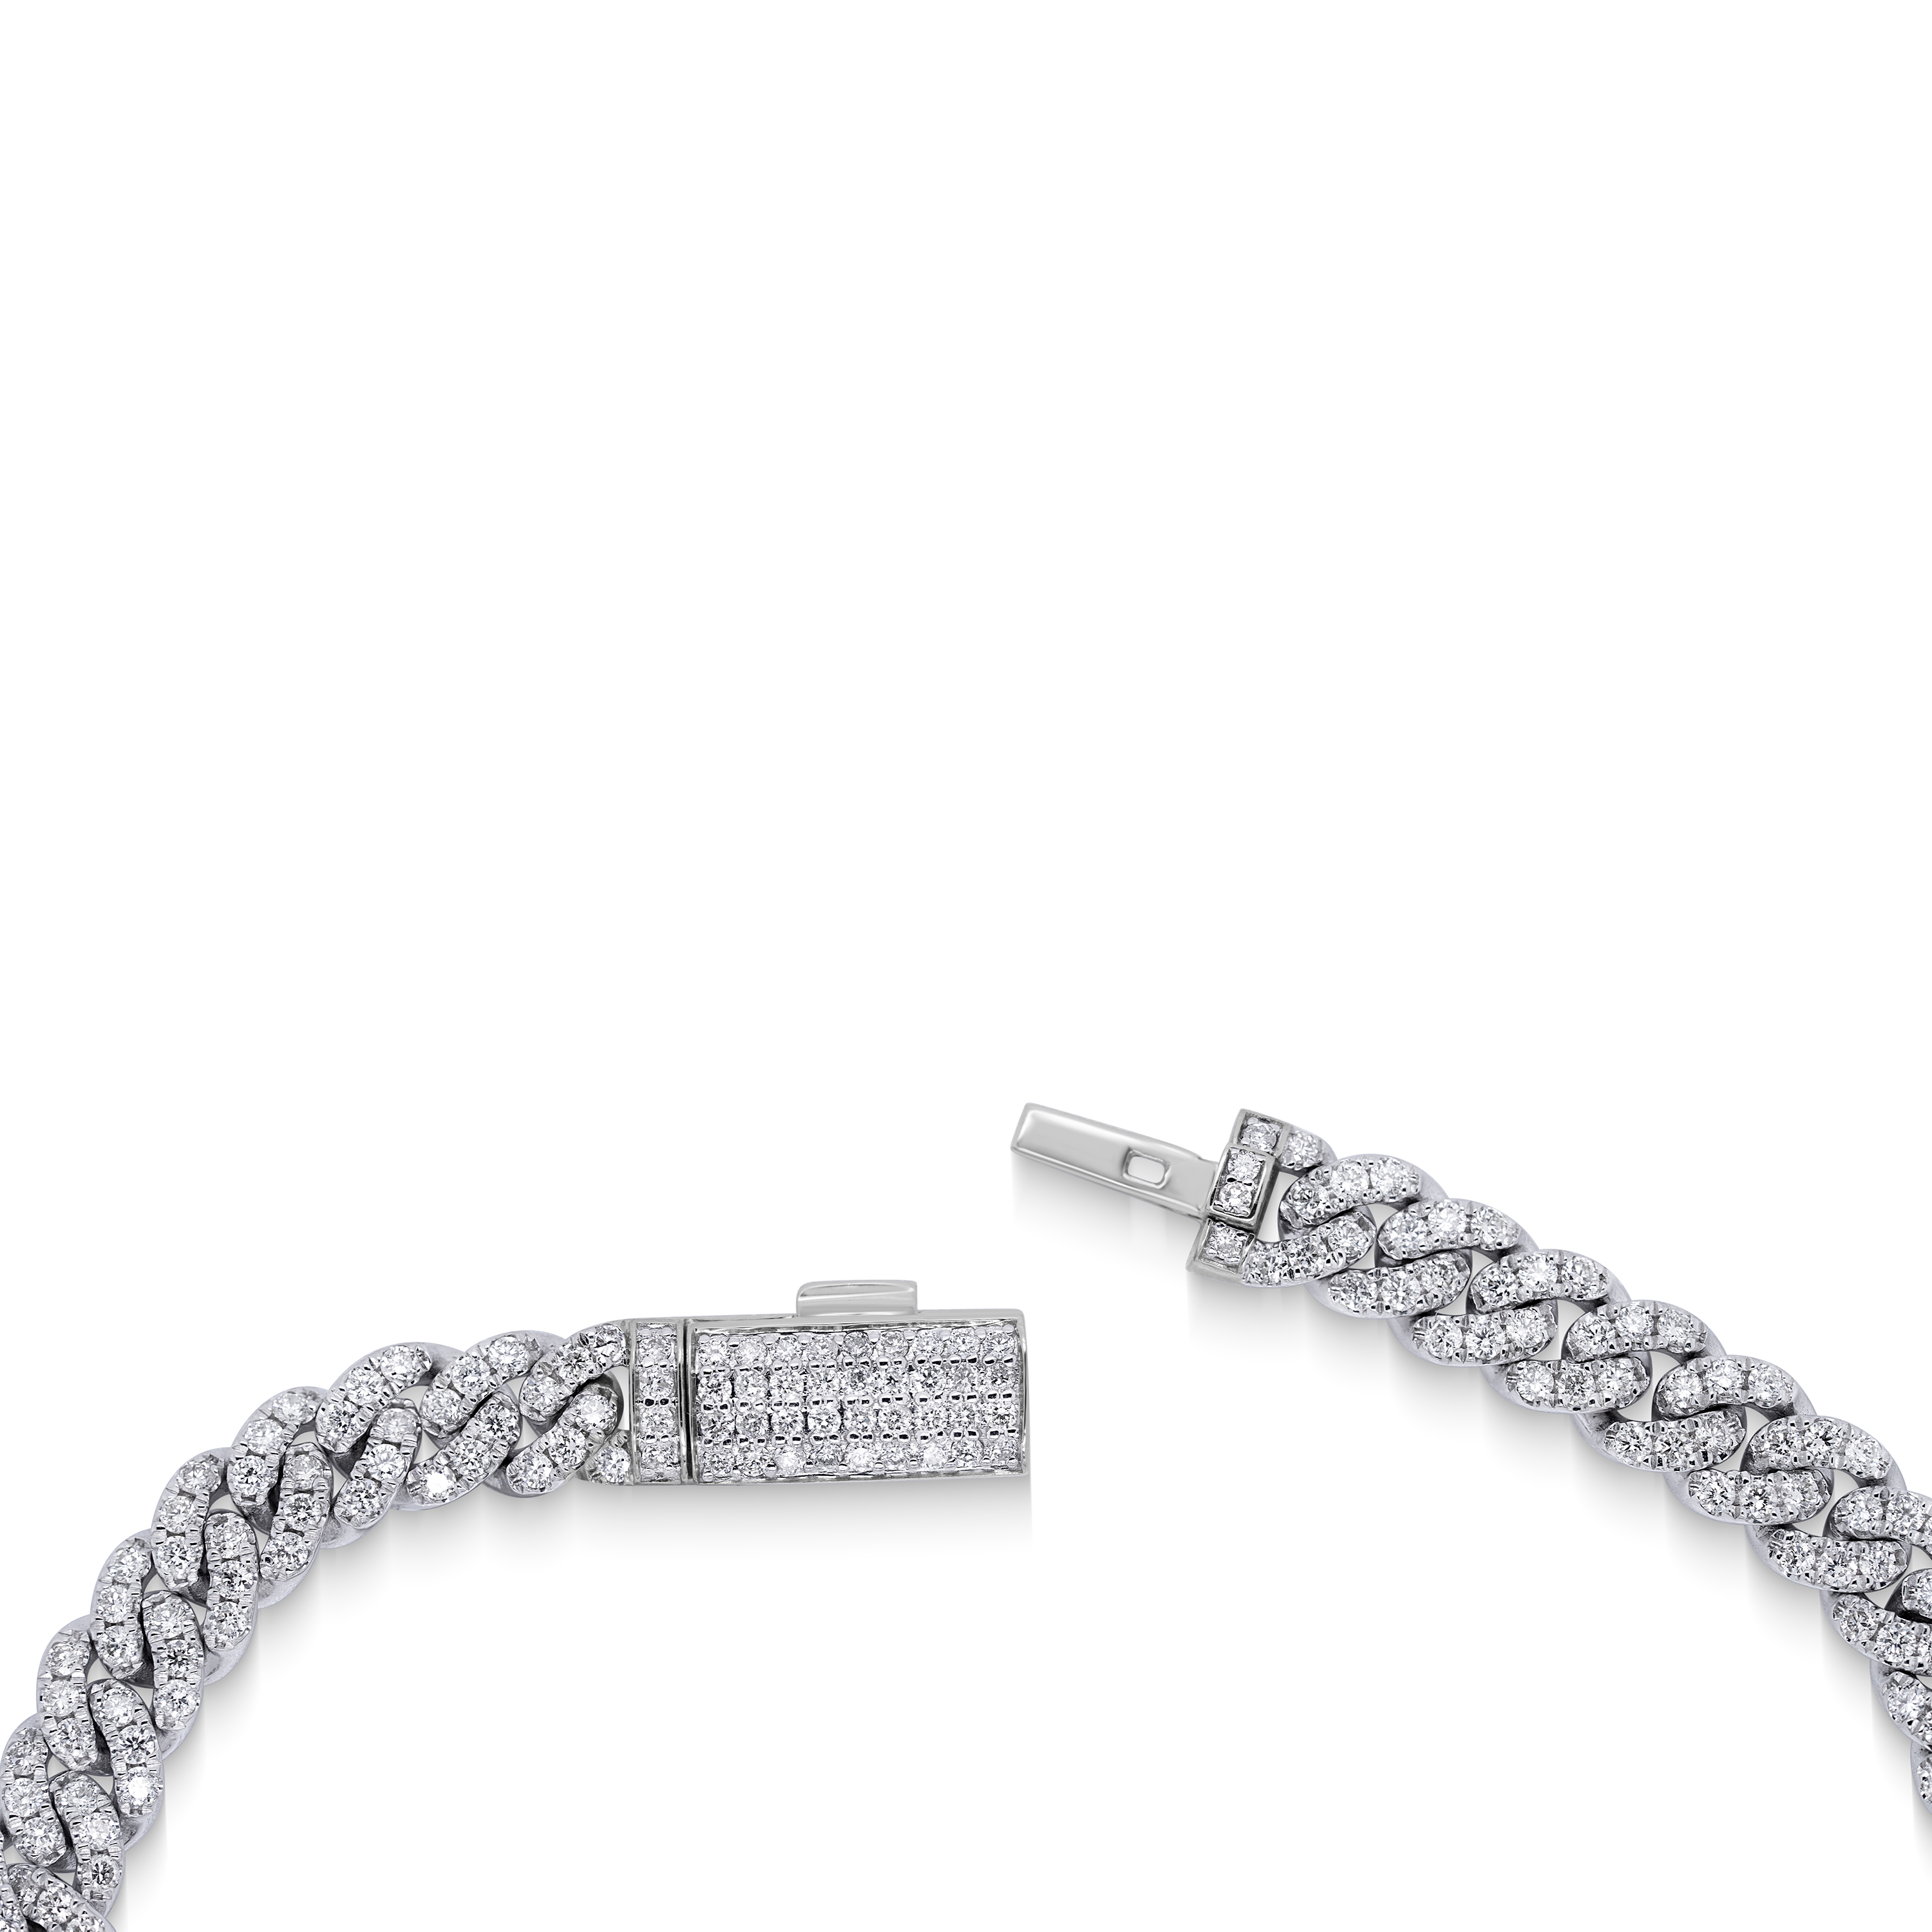 Diamond Panther Complete Necklace/Bracelet/Earrings set 3.70 ct. 14K White Gold